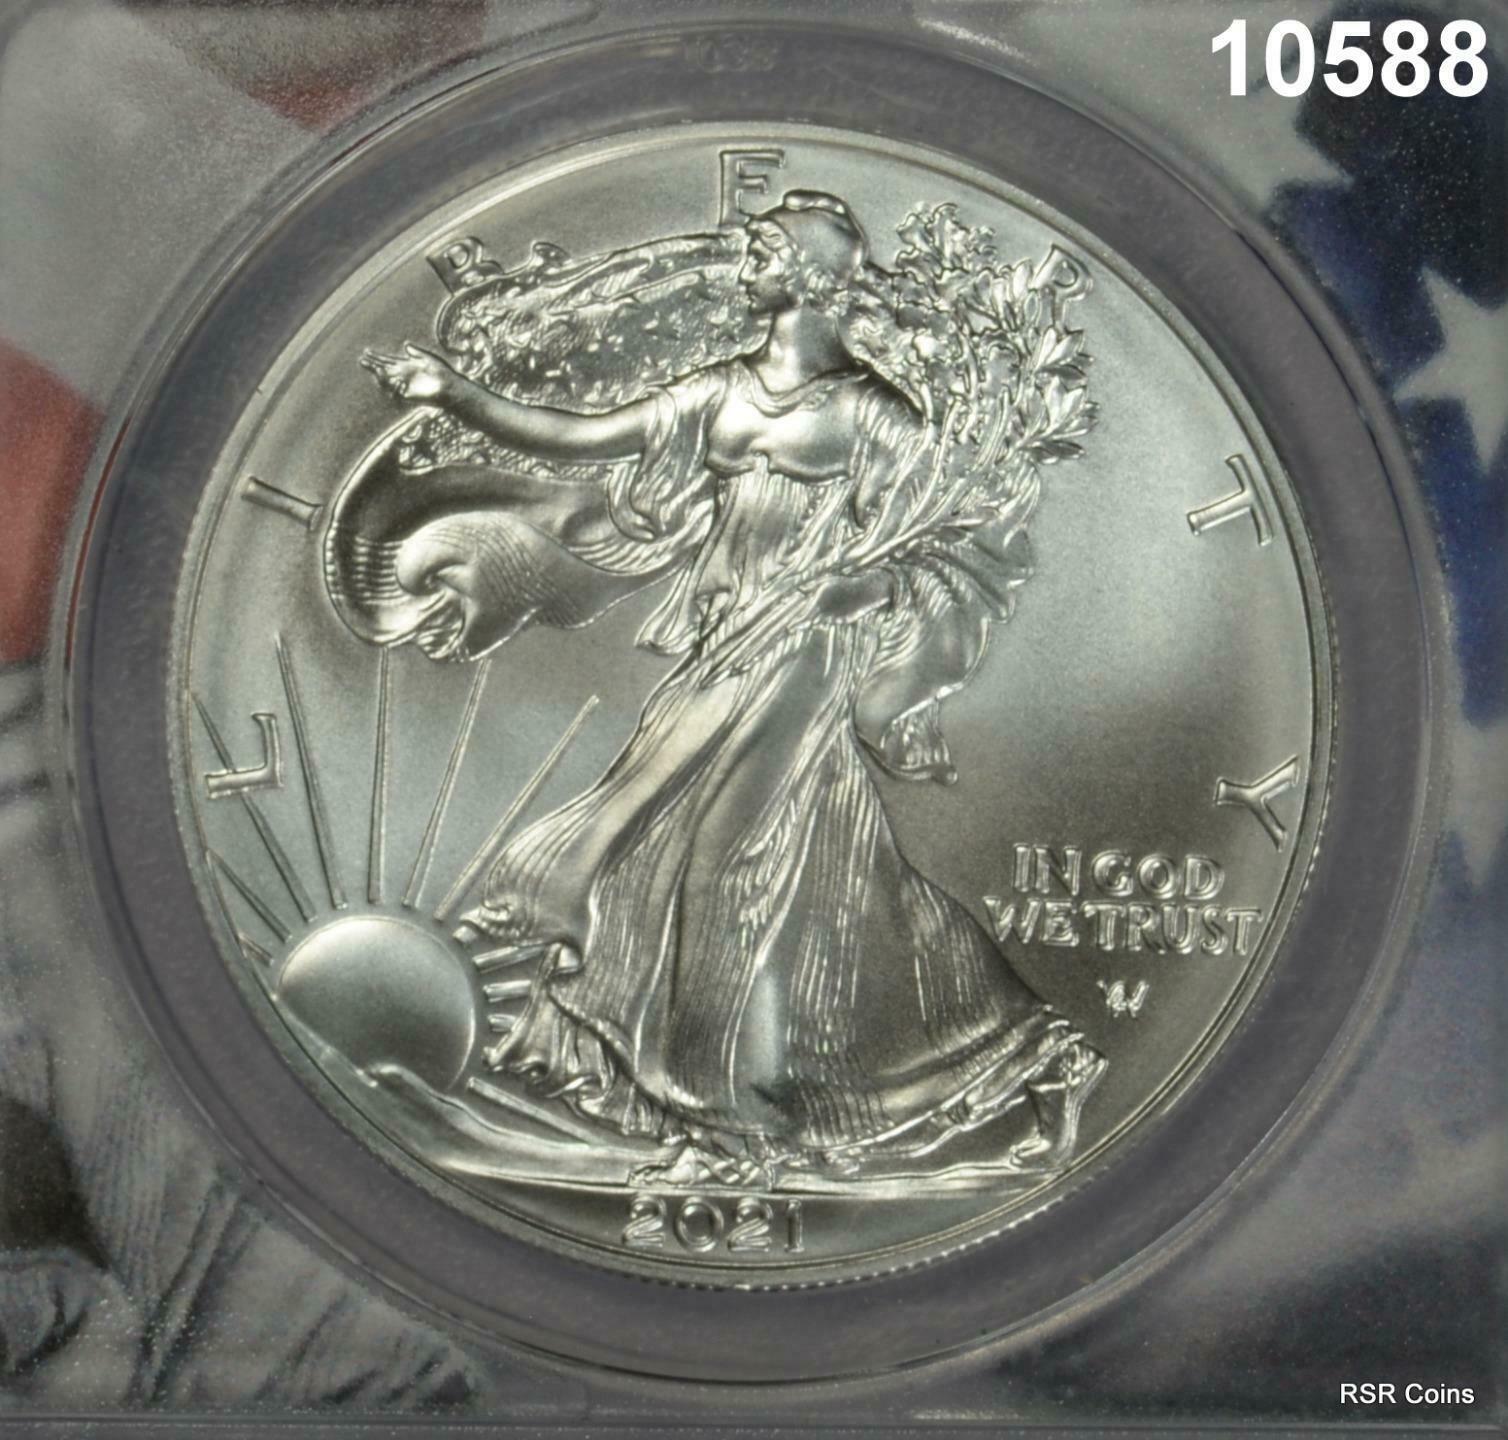 2021 SILVER EAGLE TYPE 2 ANACS CERTIFIED MS70 FIRST STRIKE PERFECT!! #10588